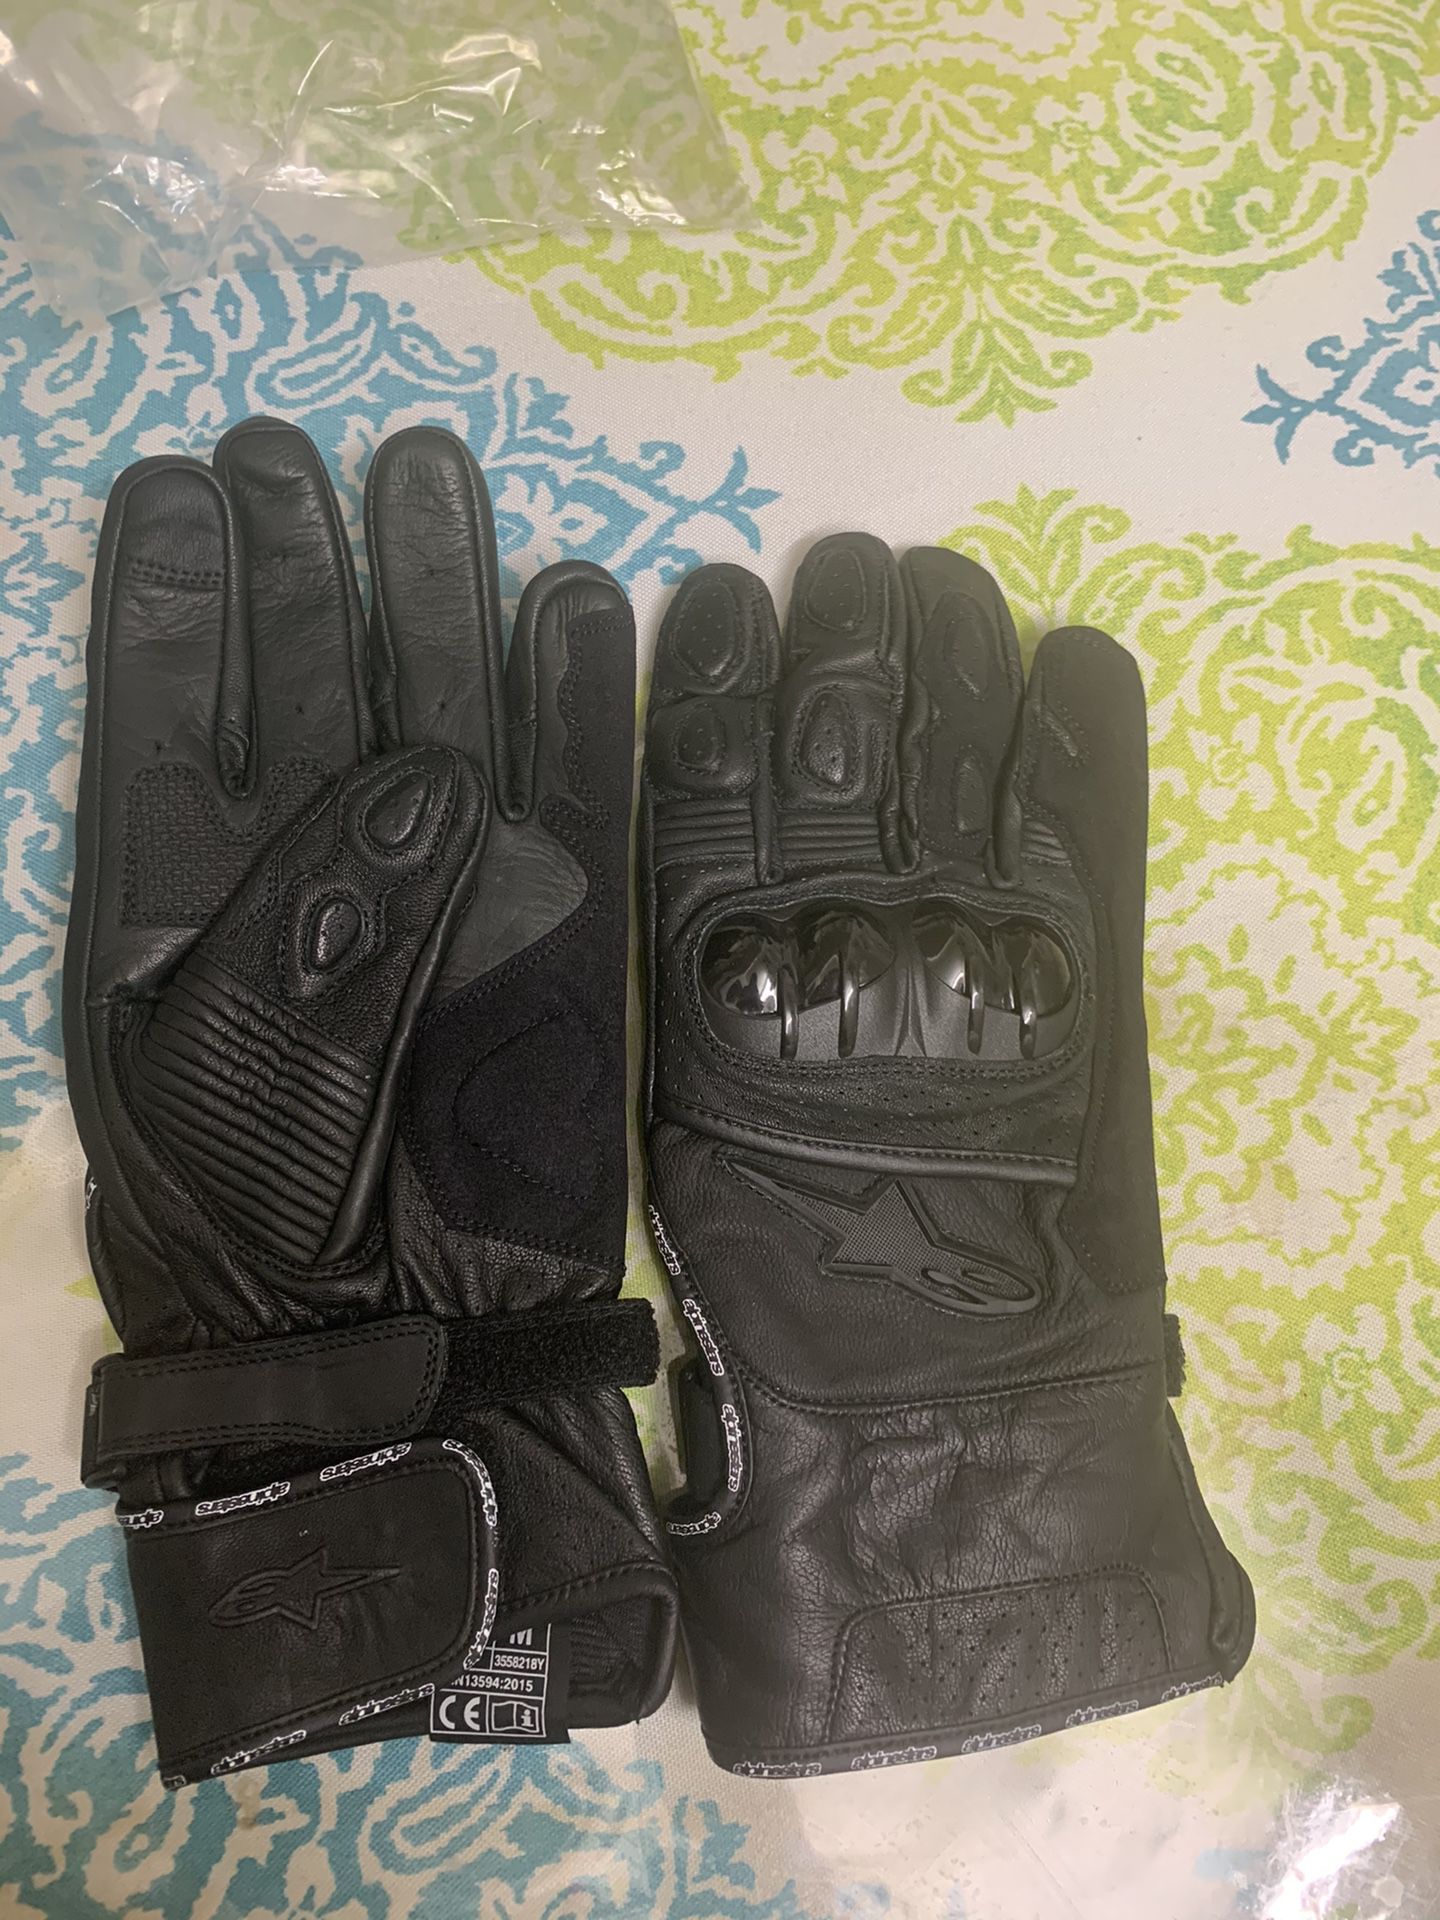 New Alpinestar Leather Motorcycle Gloves